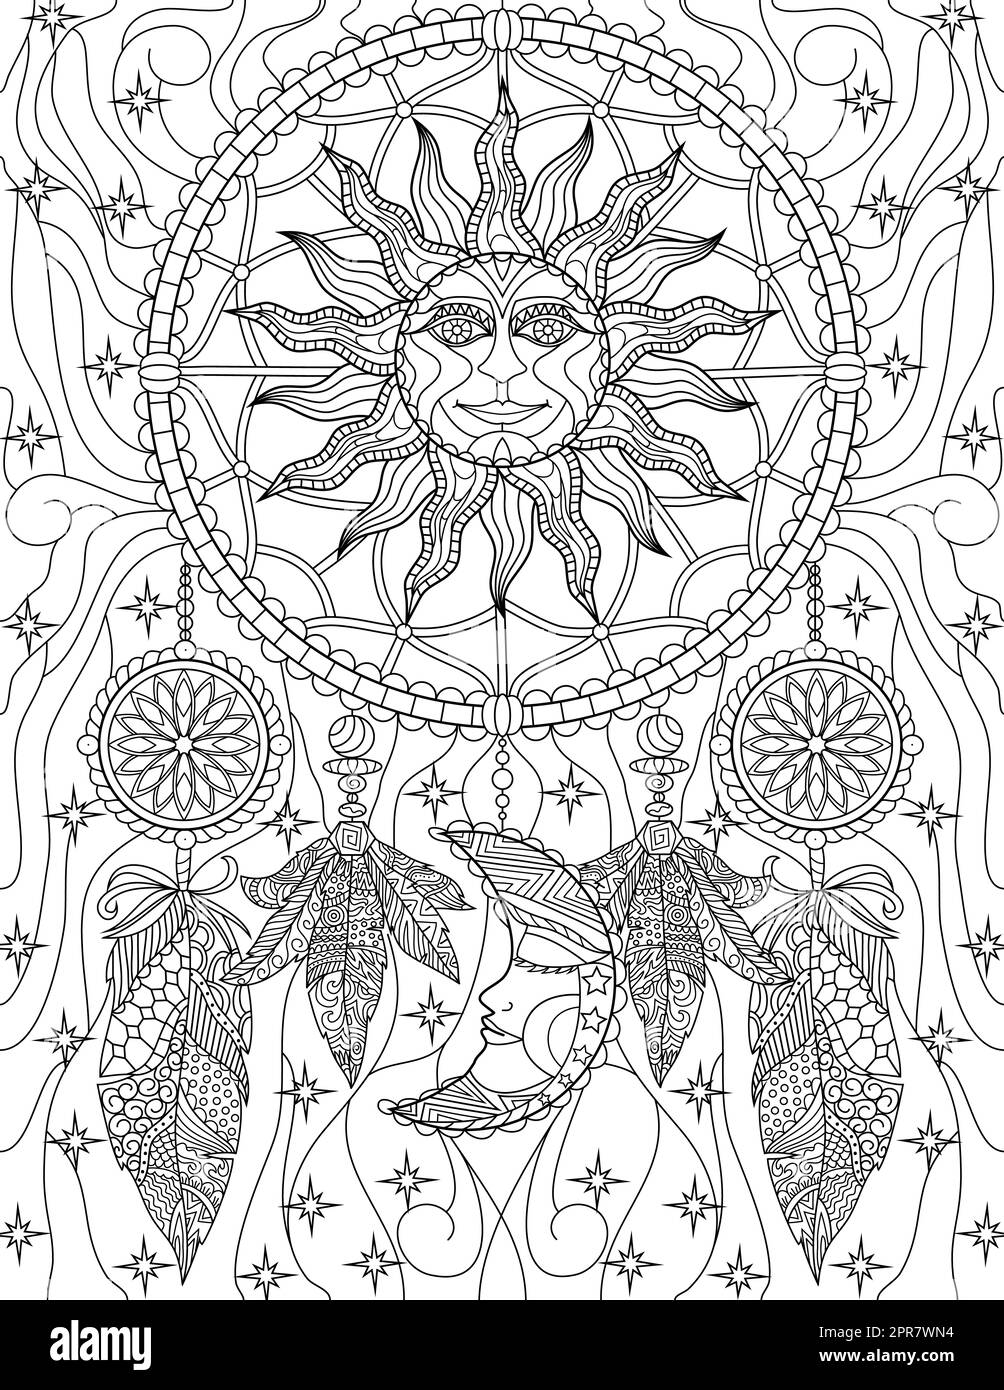 Coloring Book Page With Dreamcatcher With Sun And Moon Details. Stock Photo